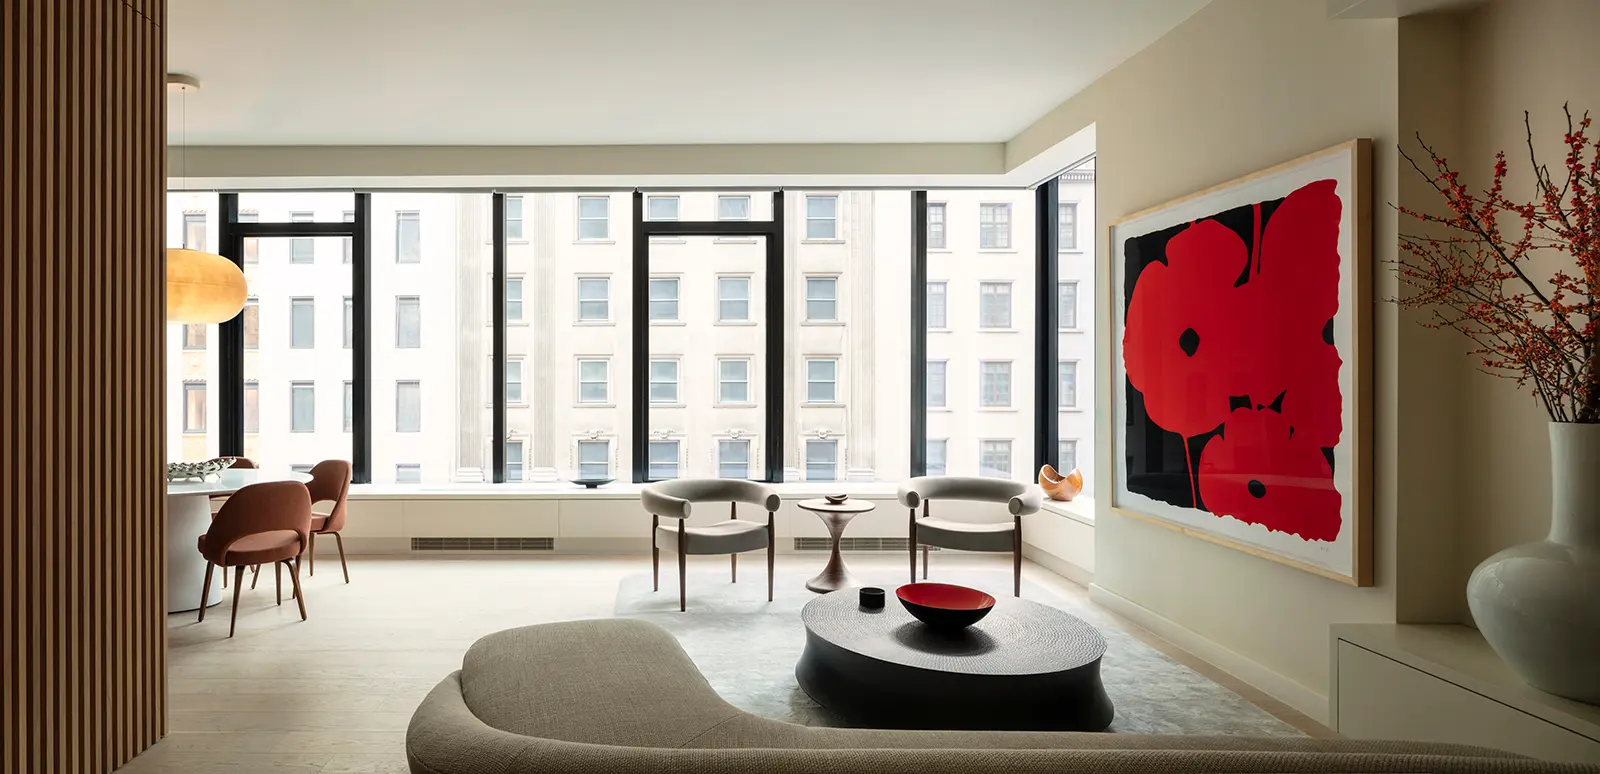 The Rian, 7 West 57th Street